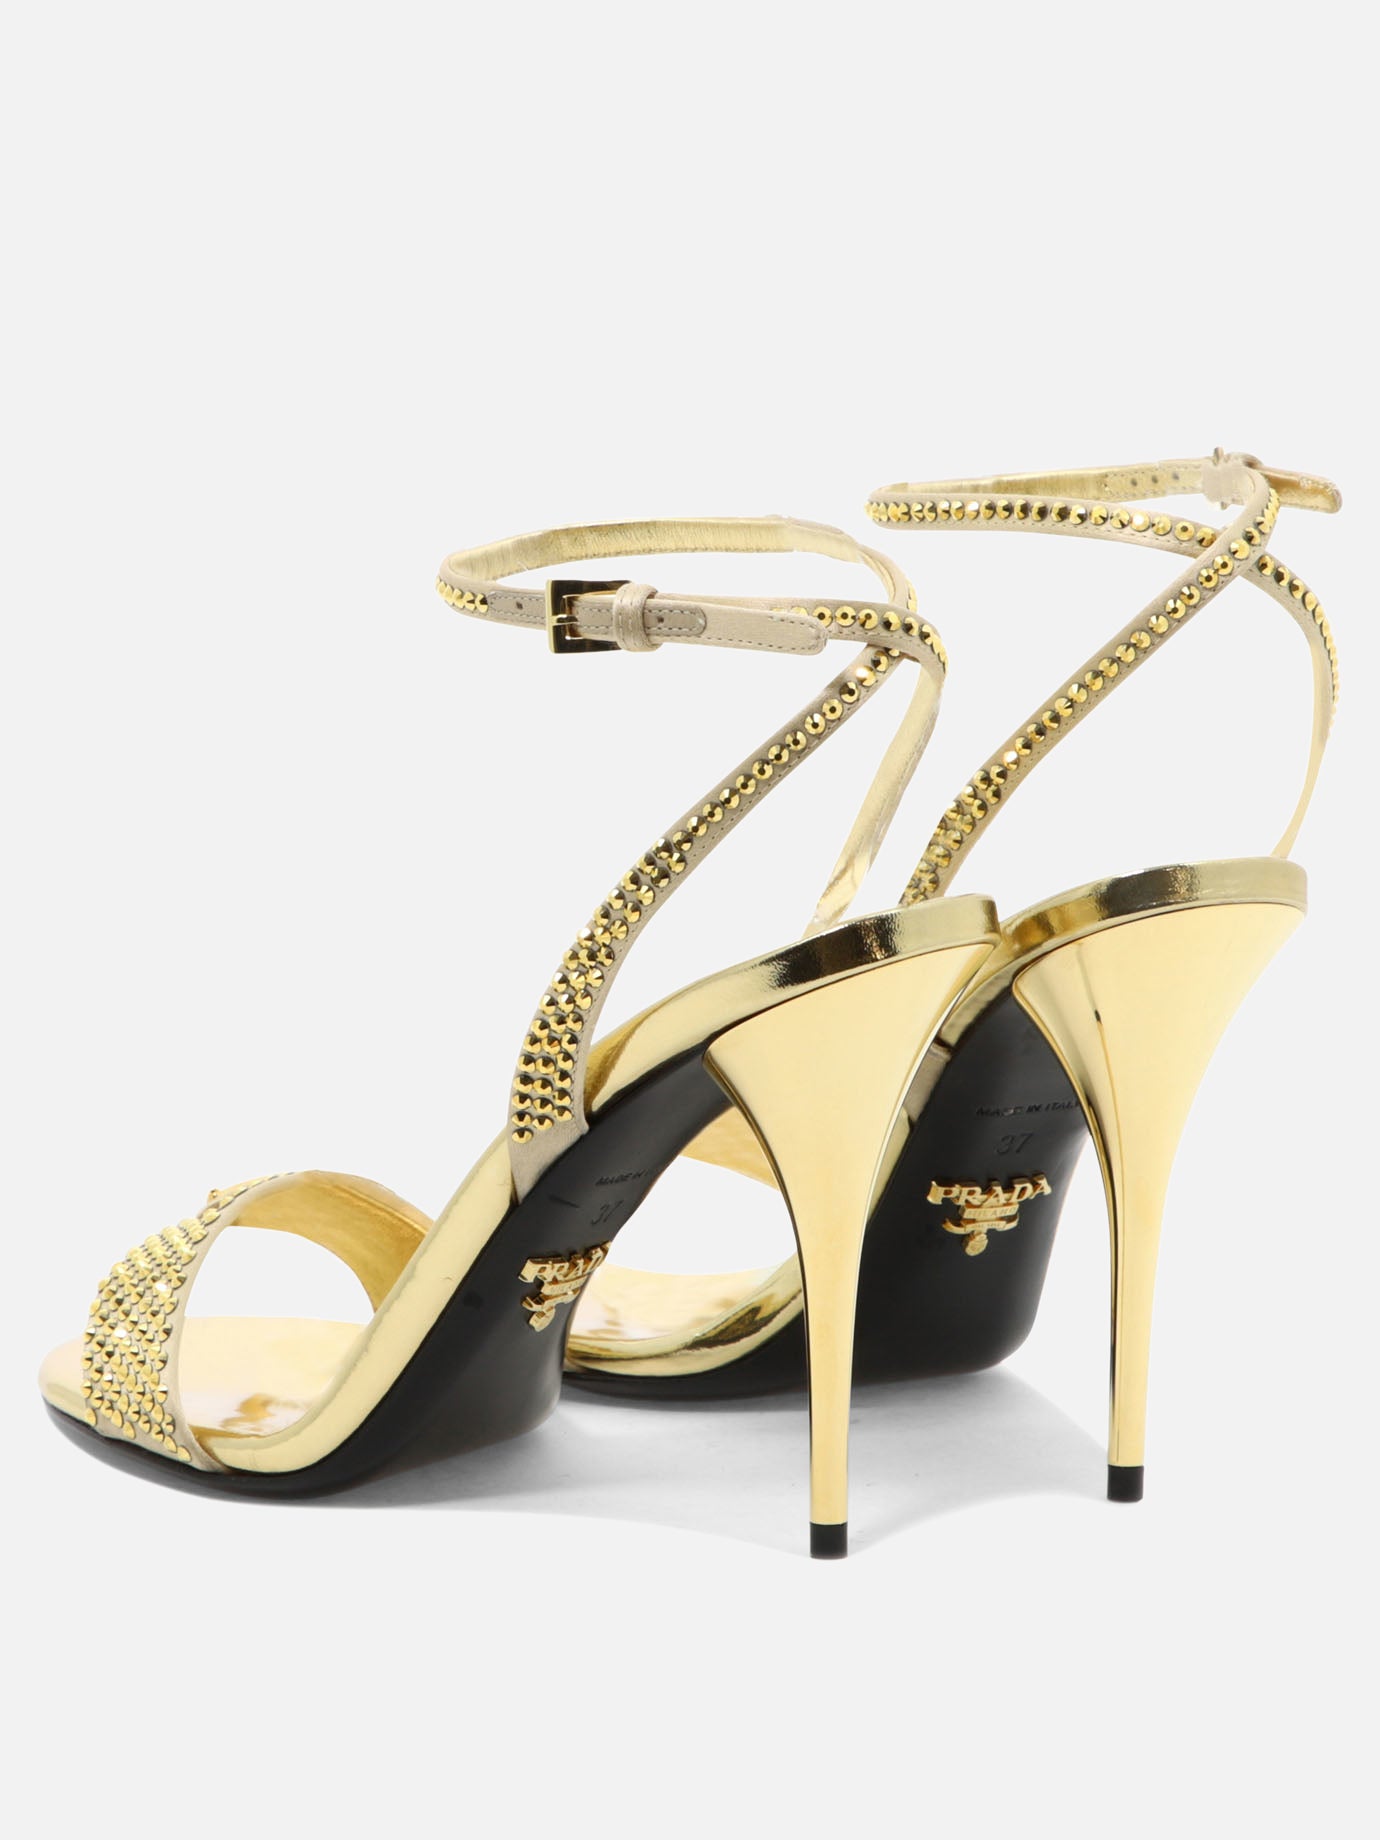 Satin sandals with crystals